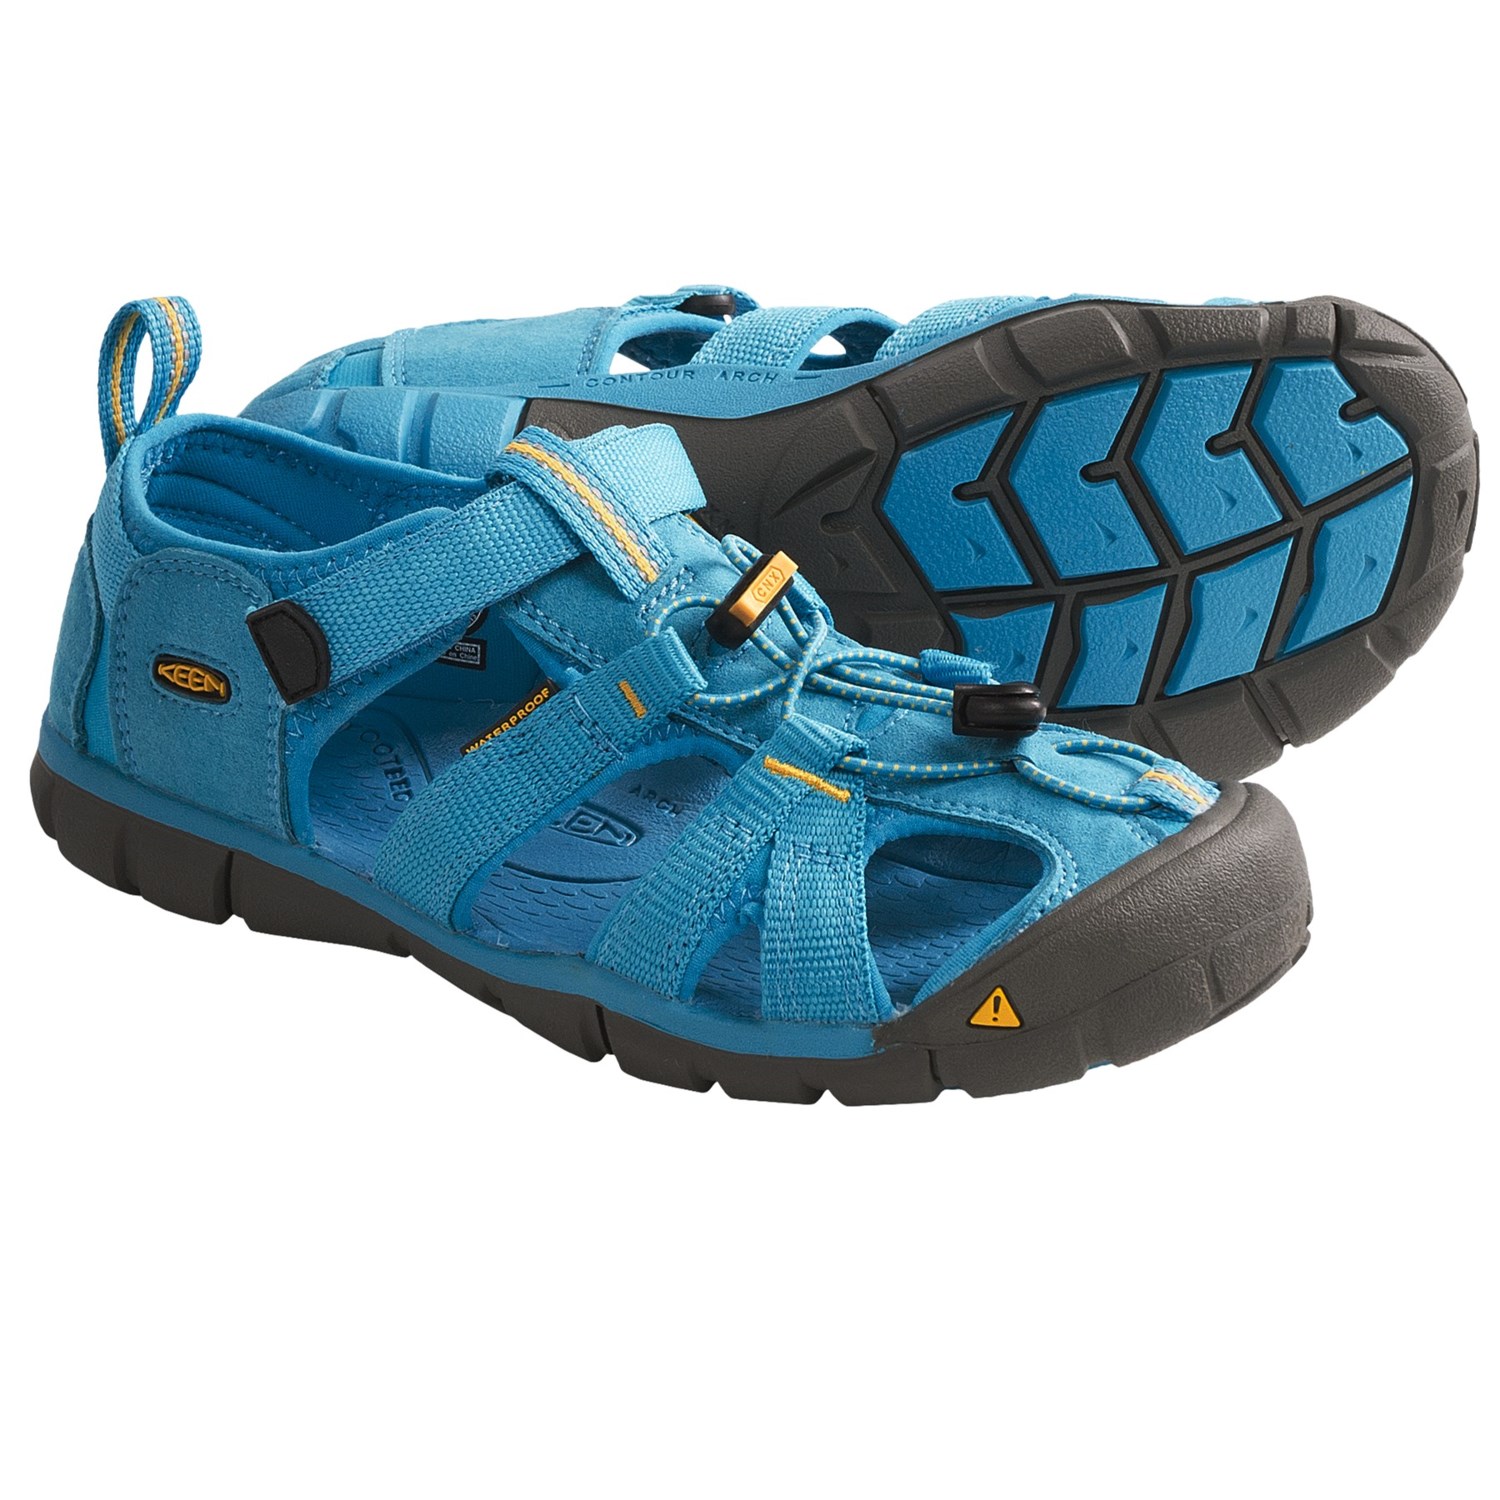 Keen Seacamp CNX Sandals (For Kids) in Vivid BlueYellow